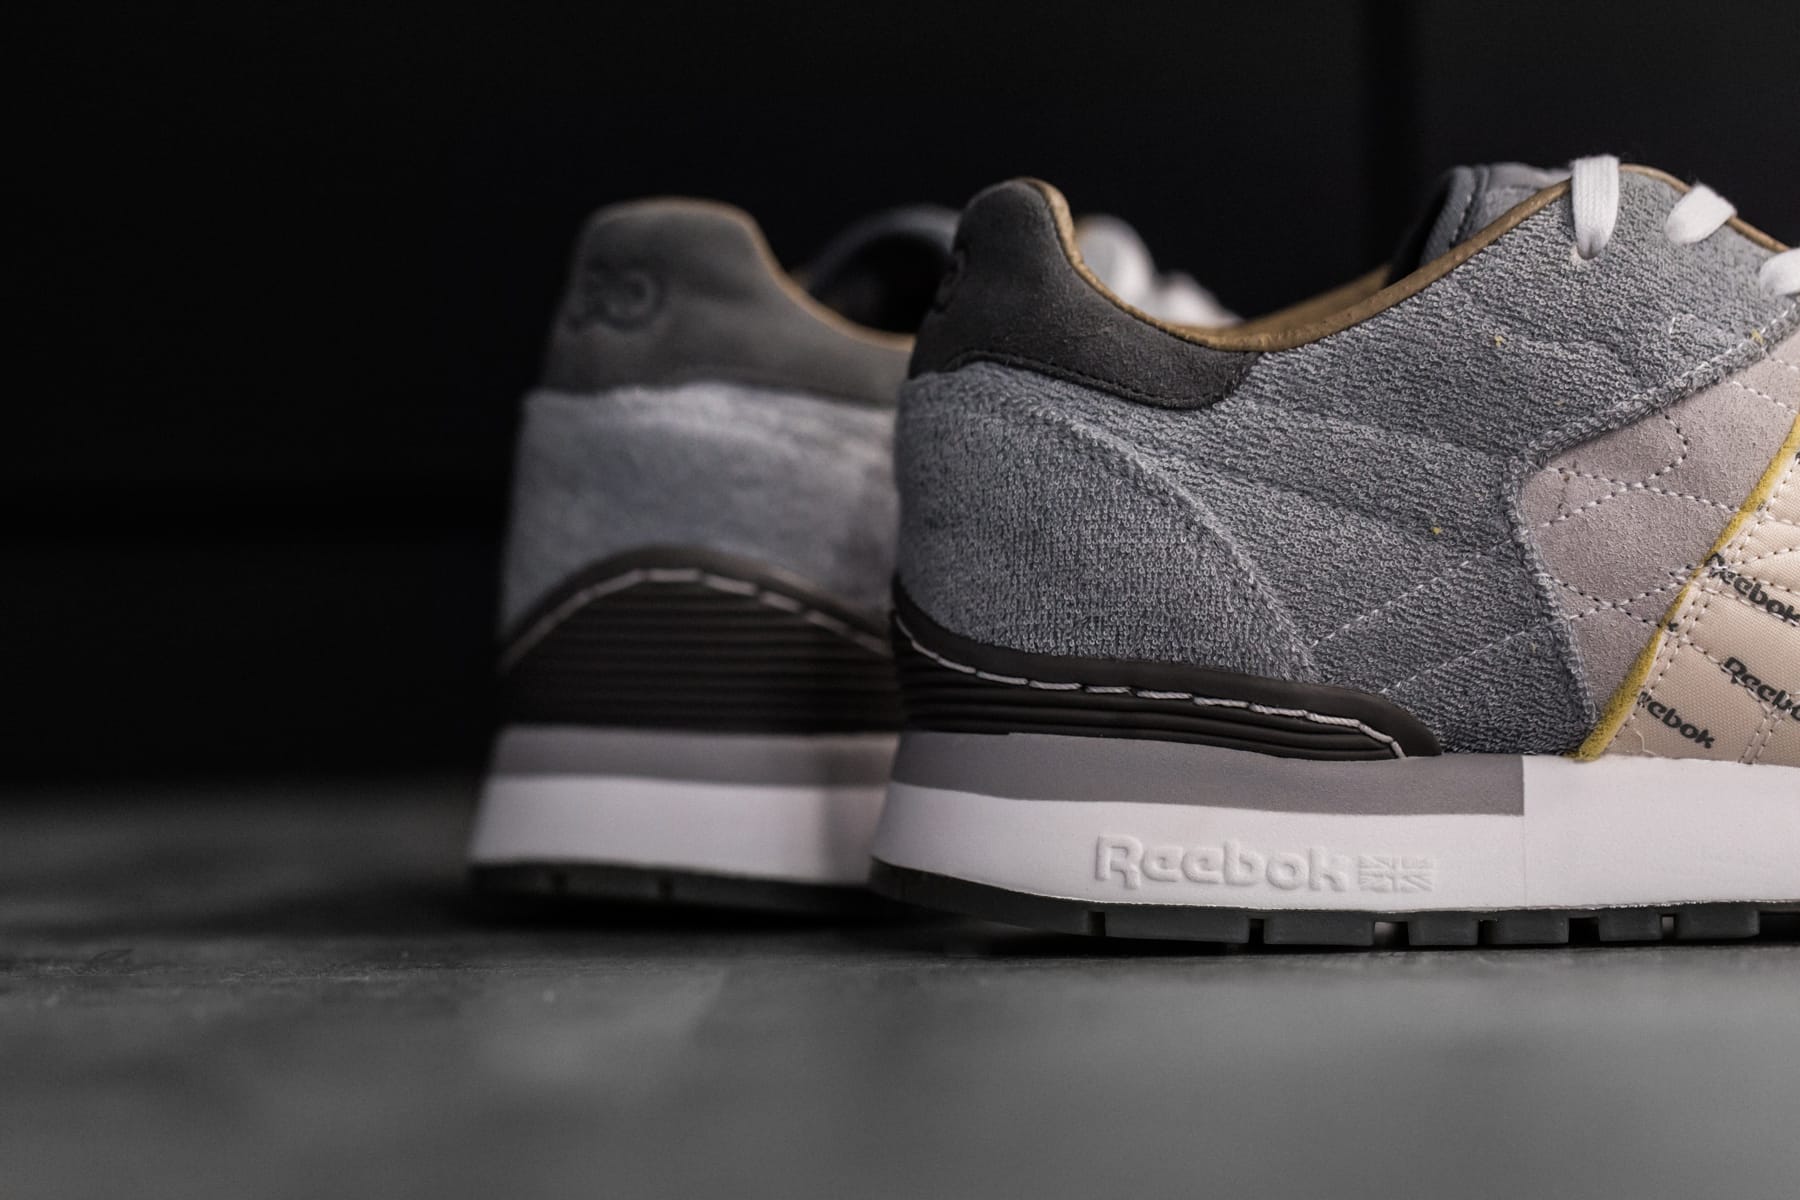 reebok x the garbstore classic leather 6000 grey white steel